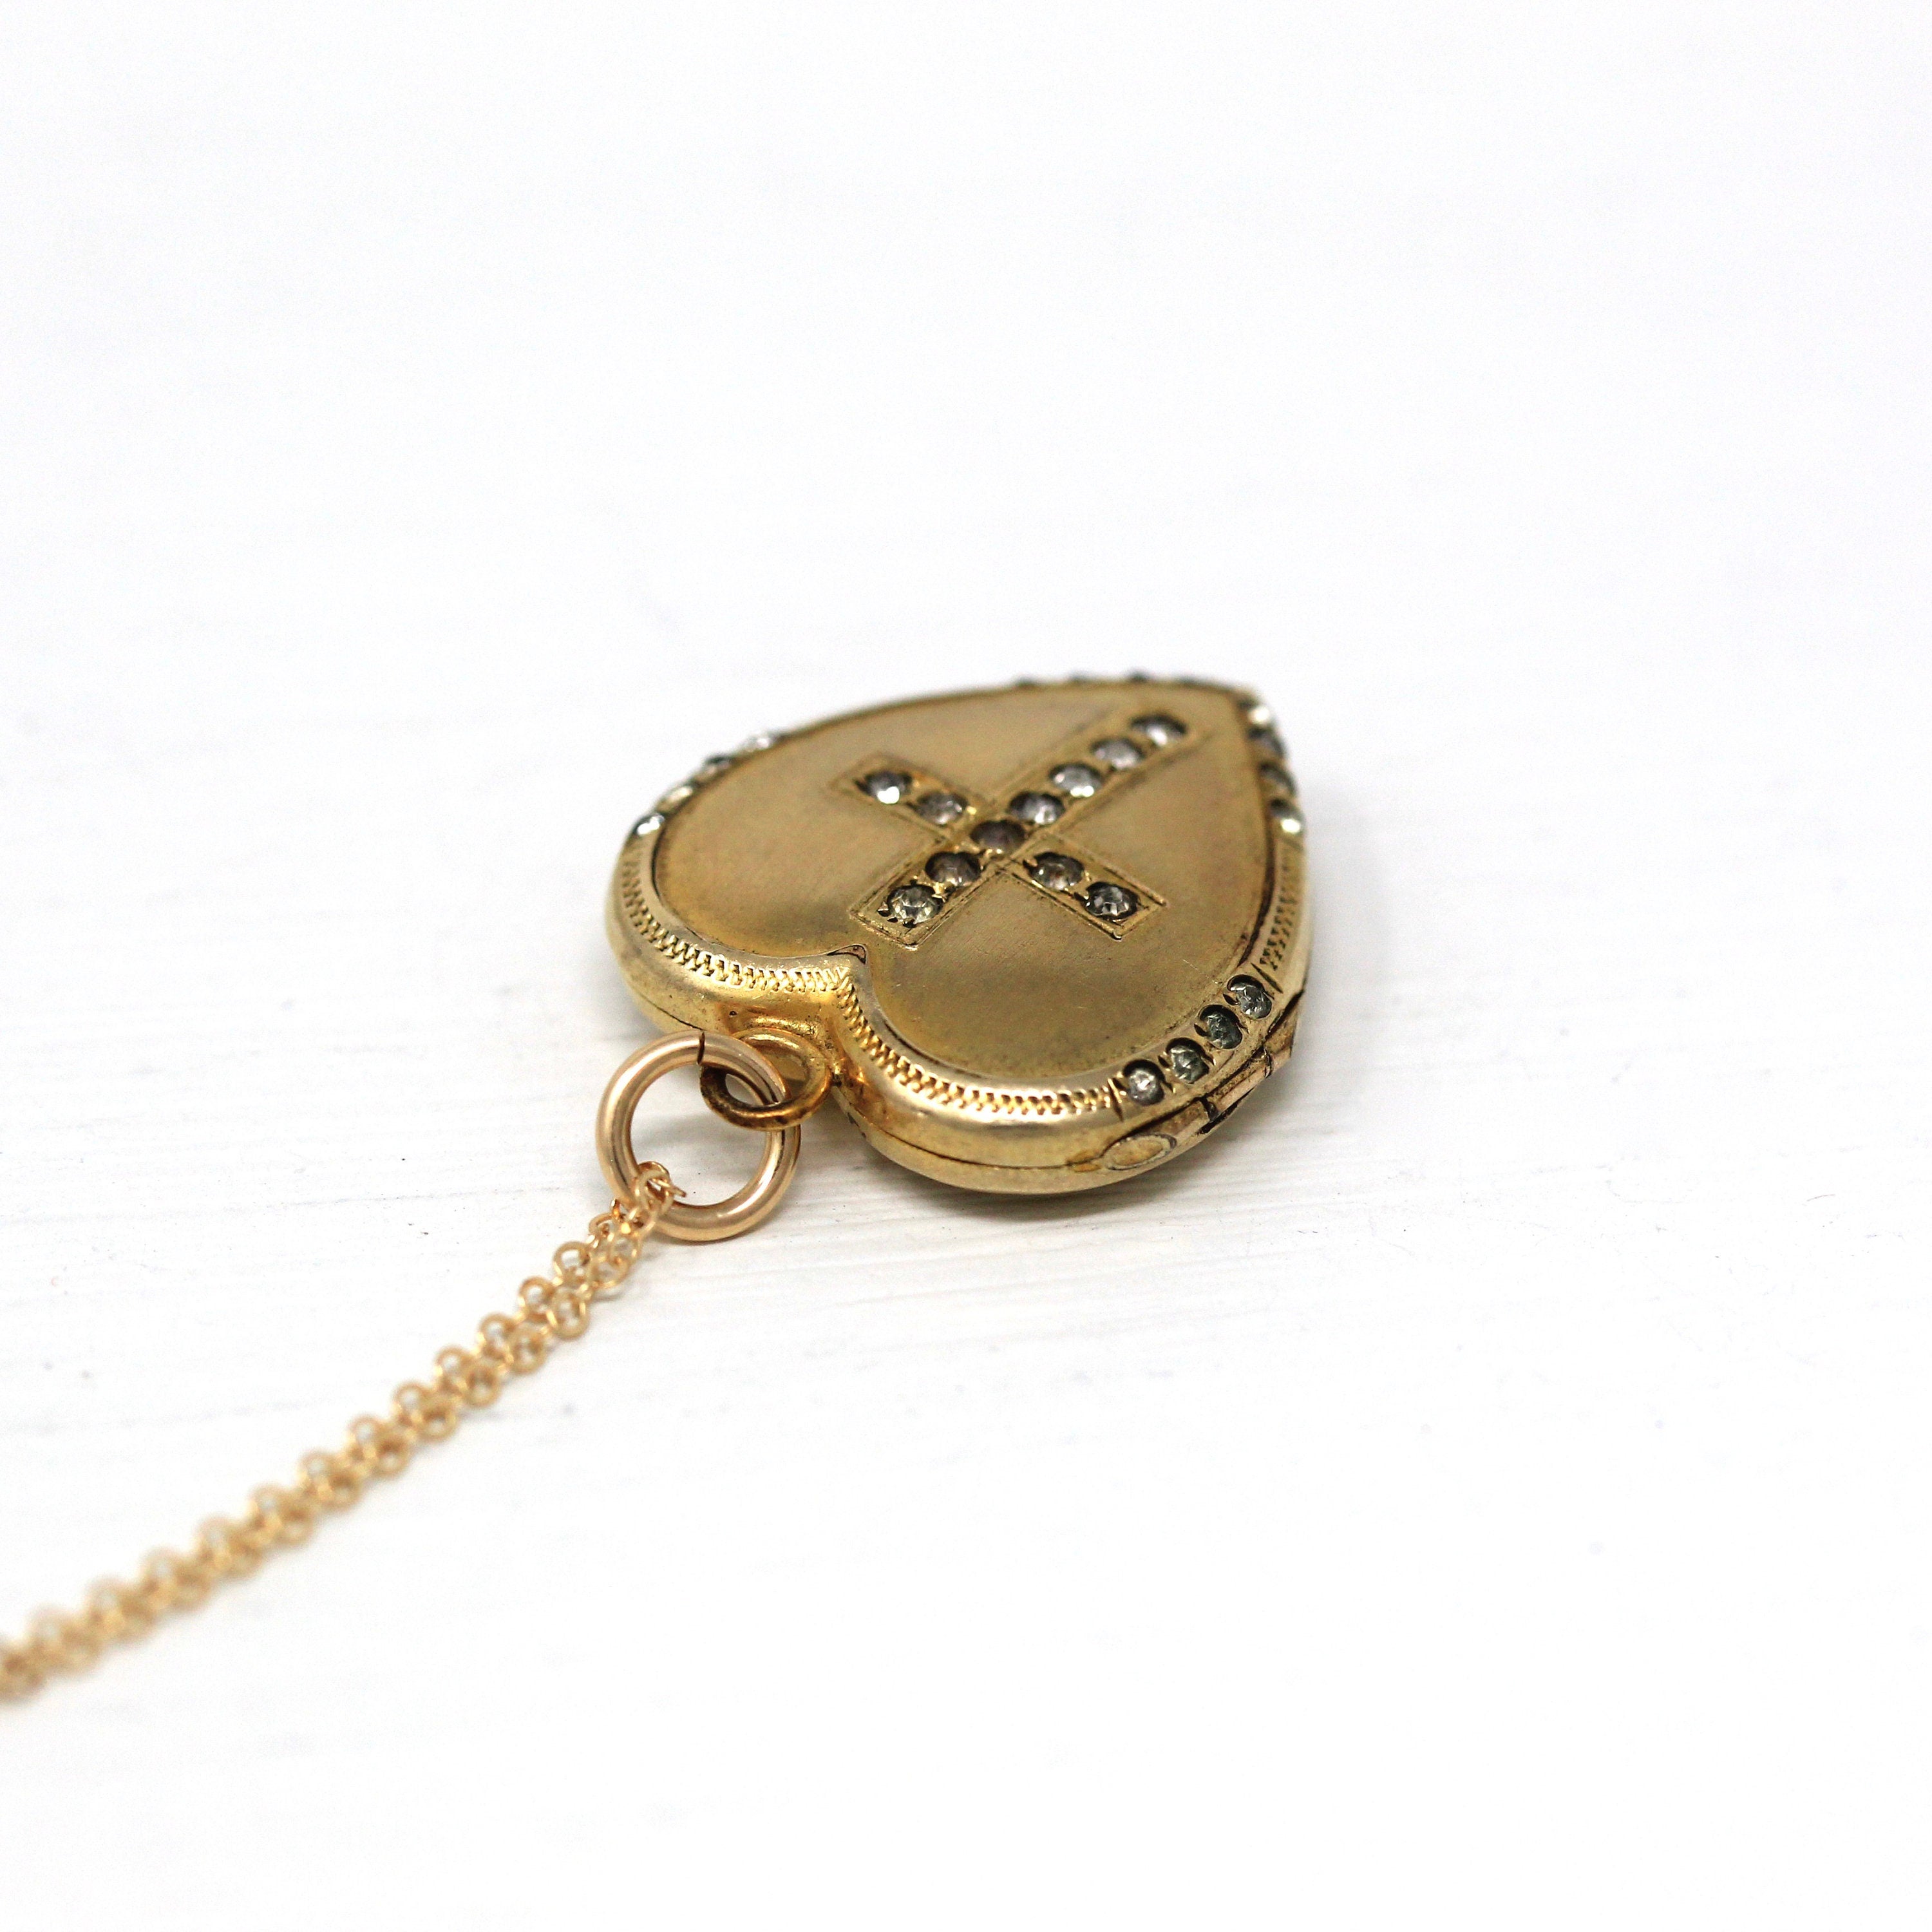 Gold Filled Victorian Revival Chain Bracelet with Heart Locket